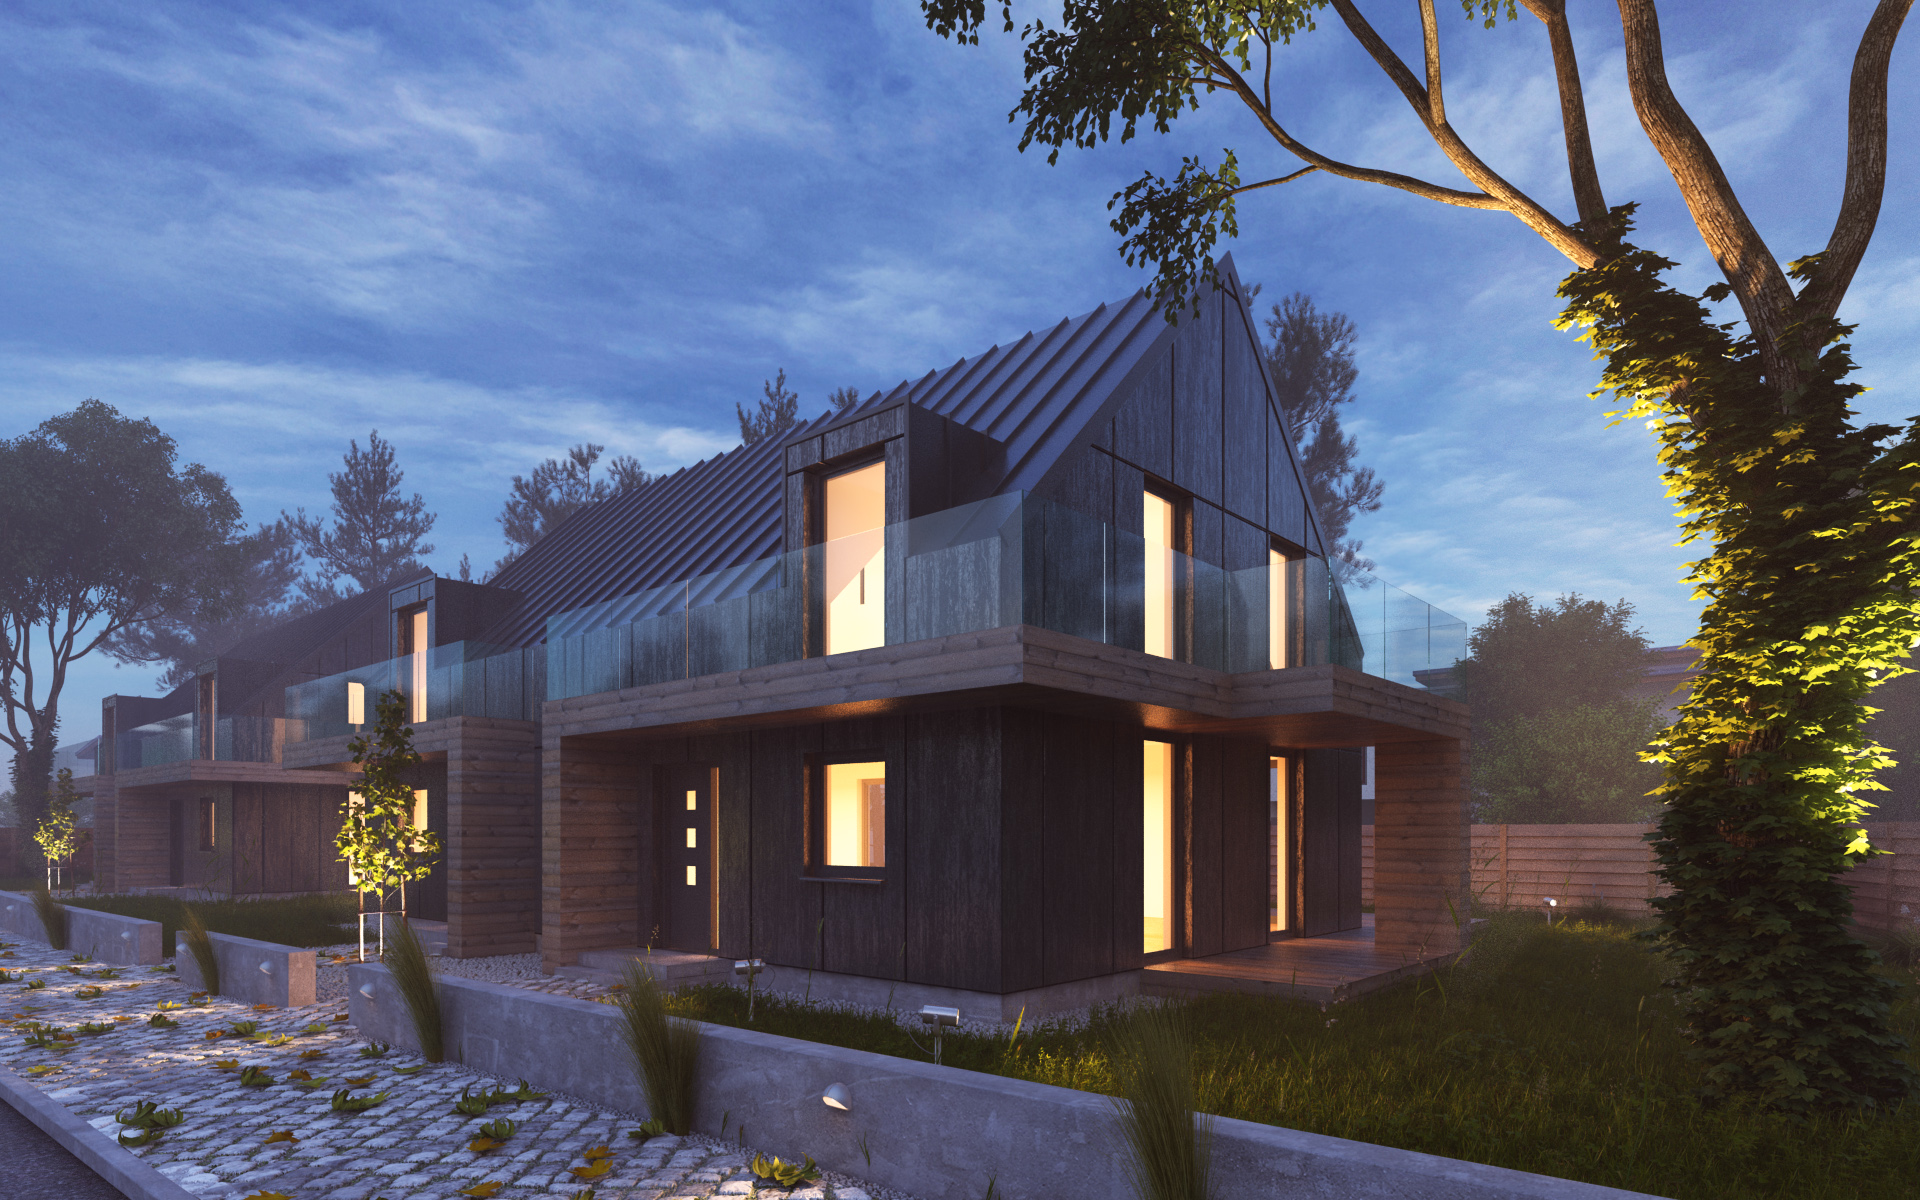 3ds max free models vray